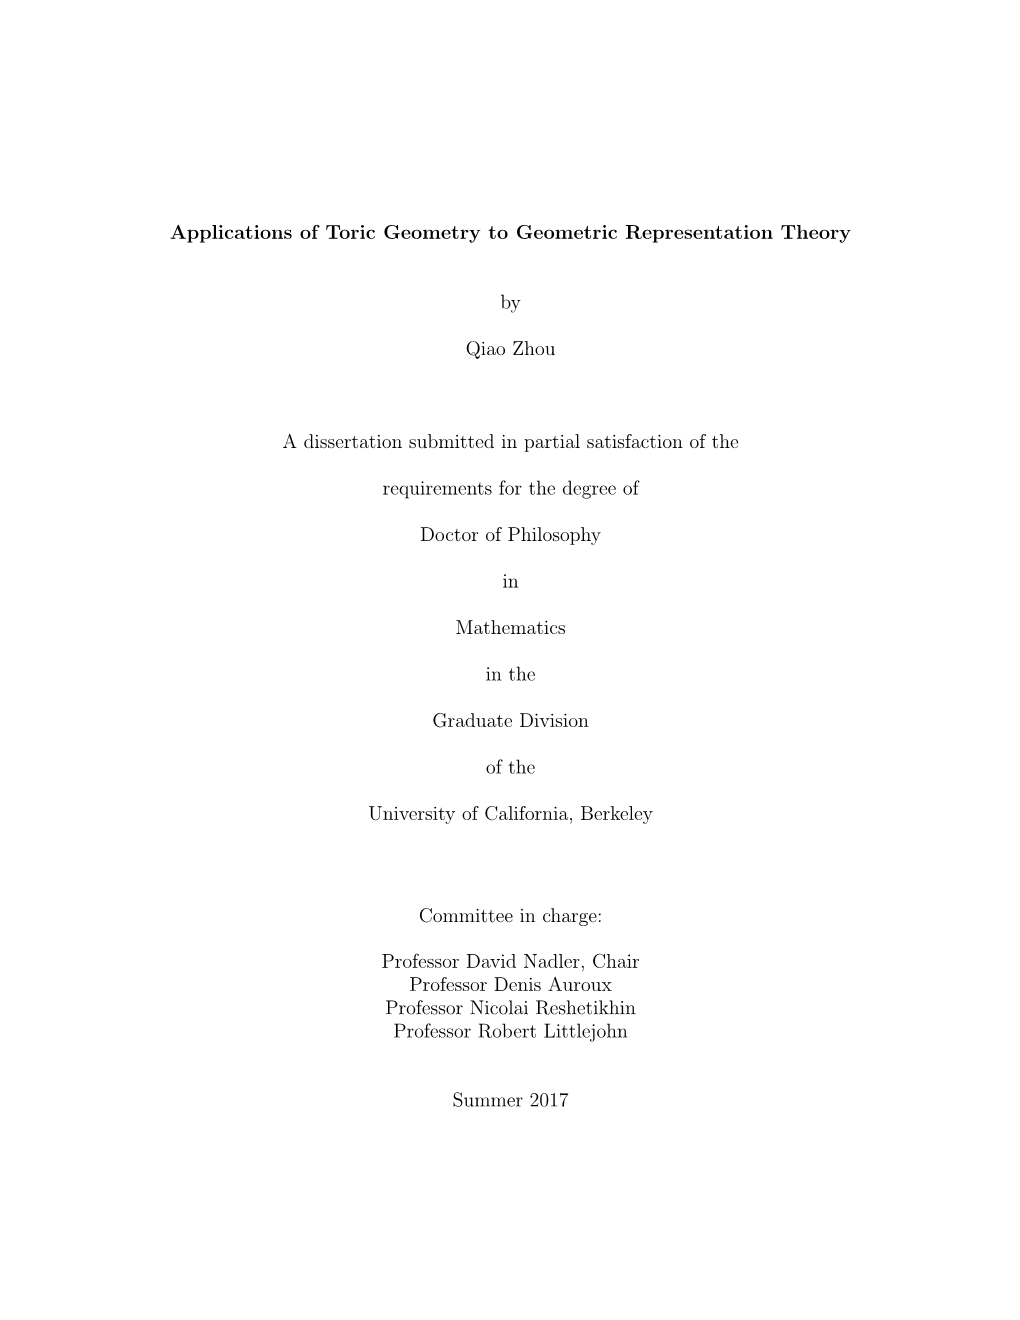 Applications of Toric Geometry to Geometric Representation Theory by Qiao Zhou a Dissertation Submitted in Partial Satisfaction